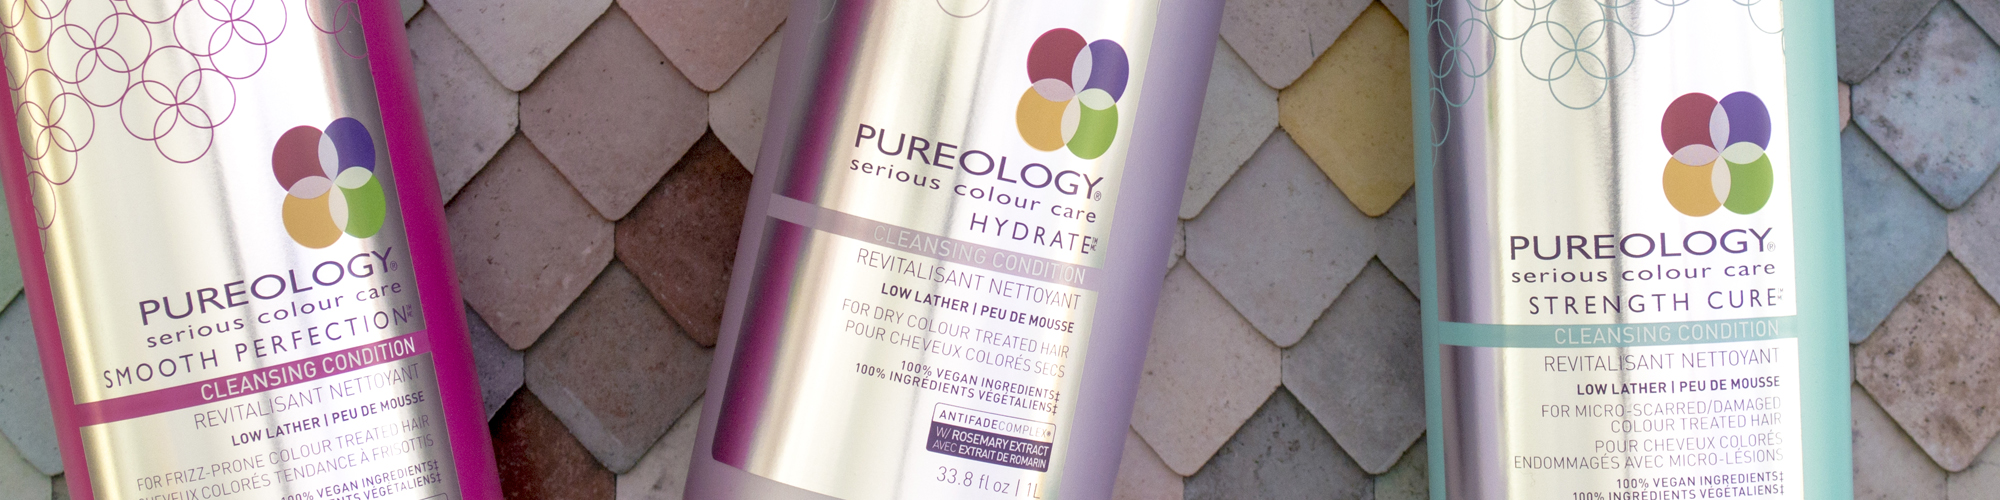 Pureology Liters copy